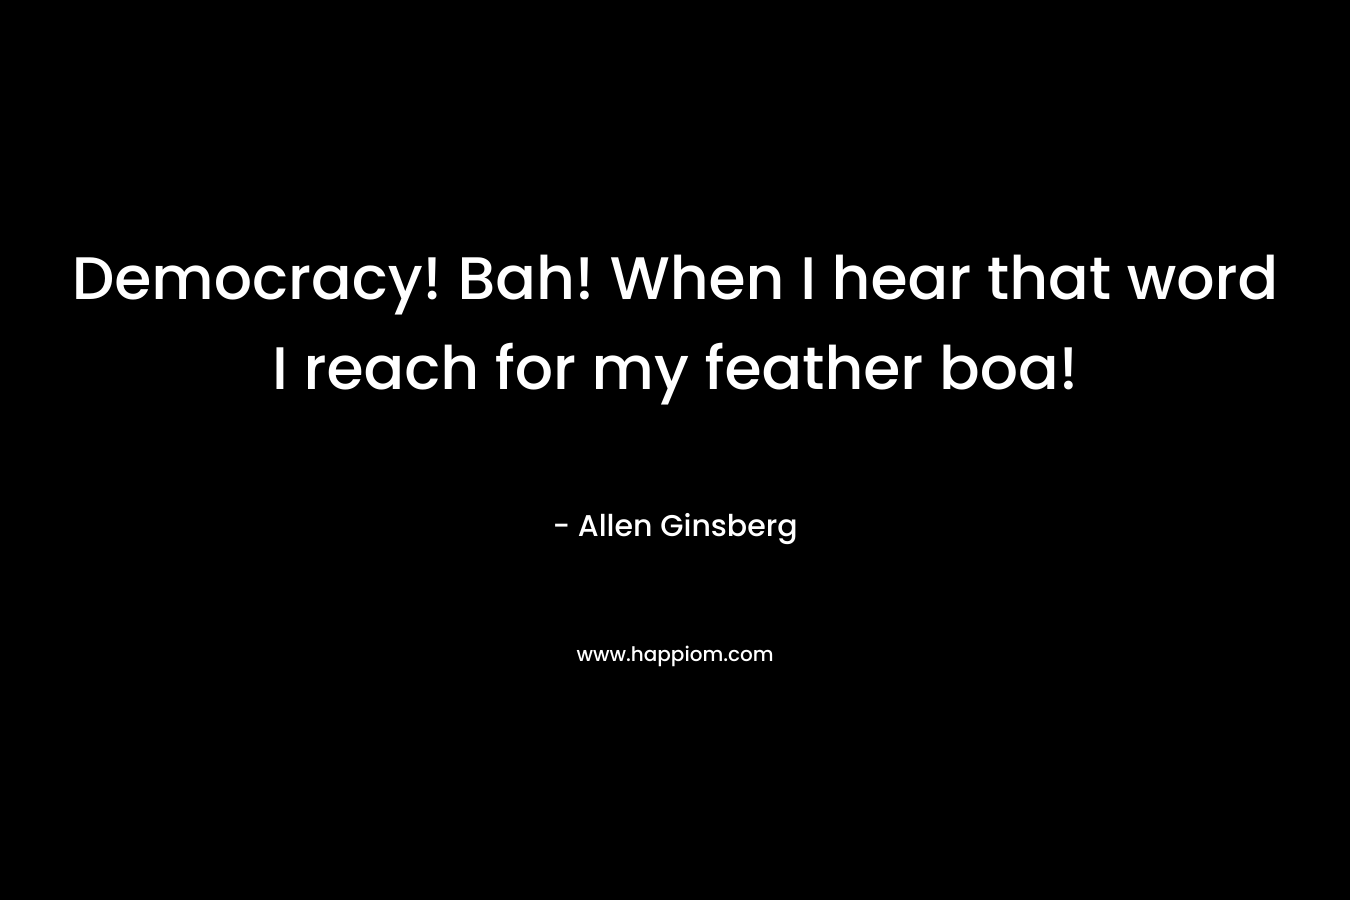 Democracy! Bah! When I hear that word I reach for my feather boa! – Allen Ginsberg